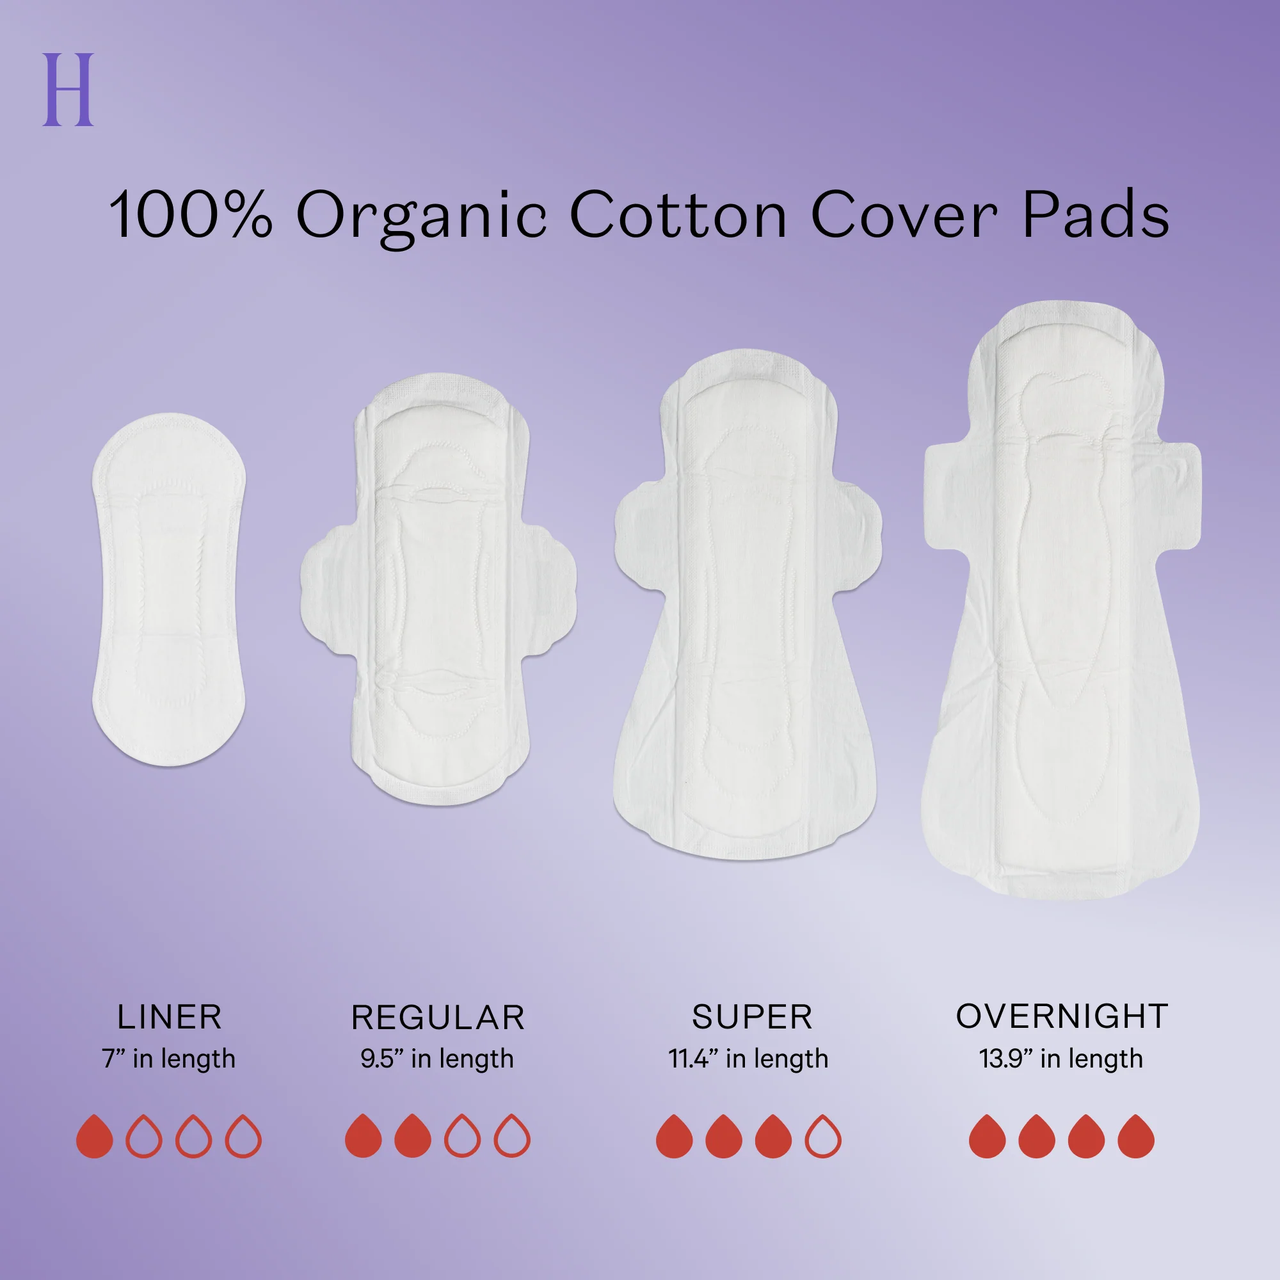 Organic Cotton Cover Non-Herbal Everyday Liners - Honey Pot Comp.